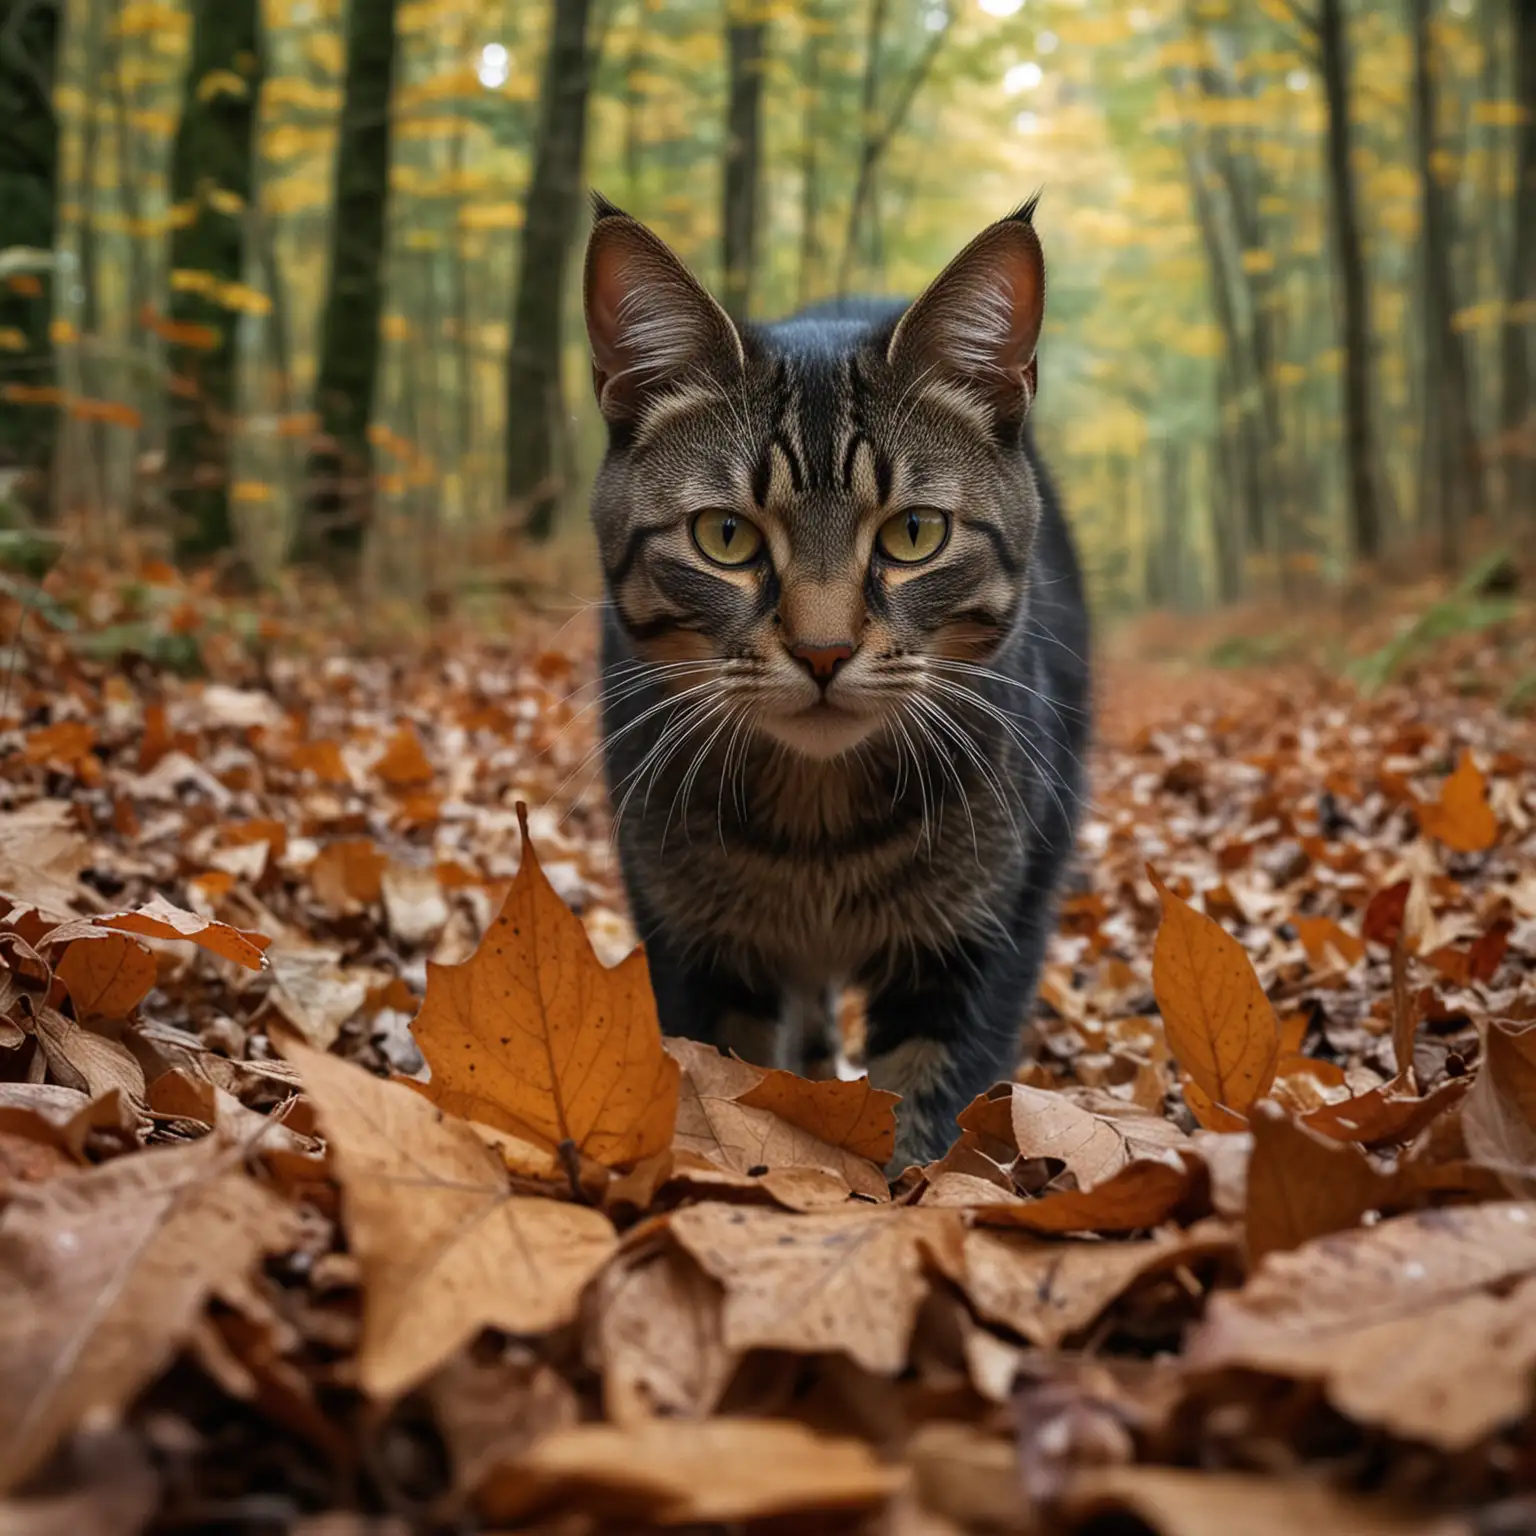 Stealthy Cat Prowling in Dense Forest Capturing Focused Gaze and Wilderness